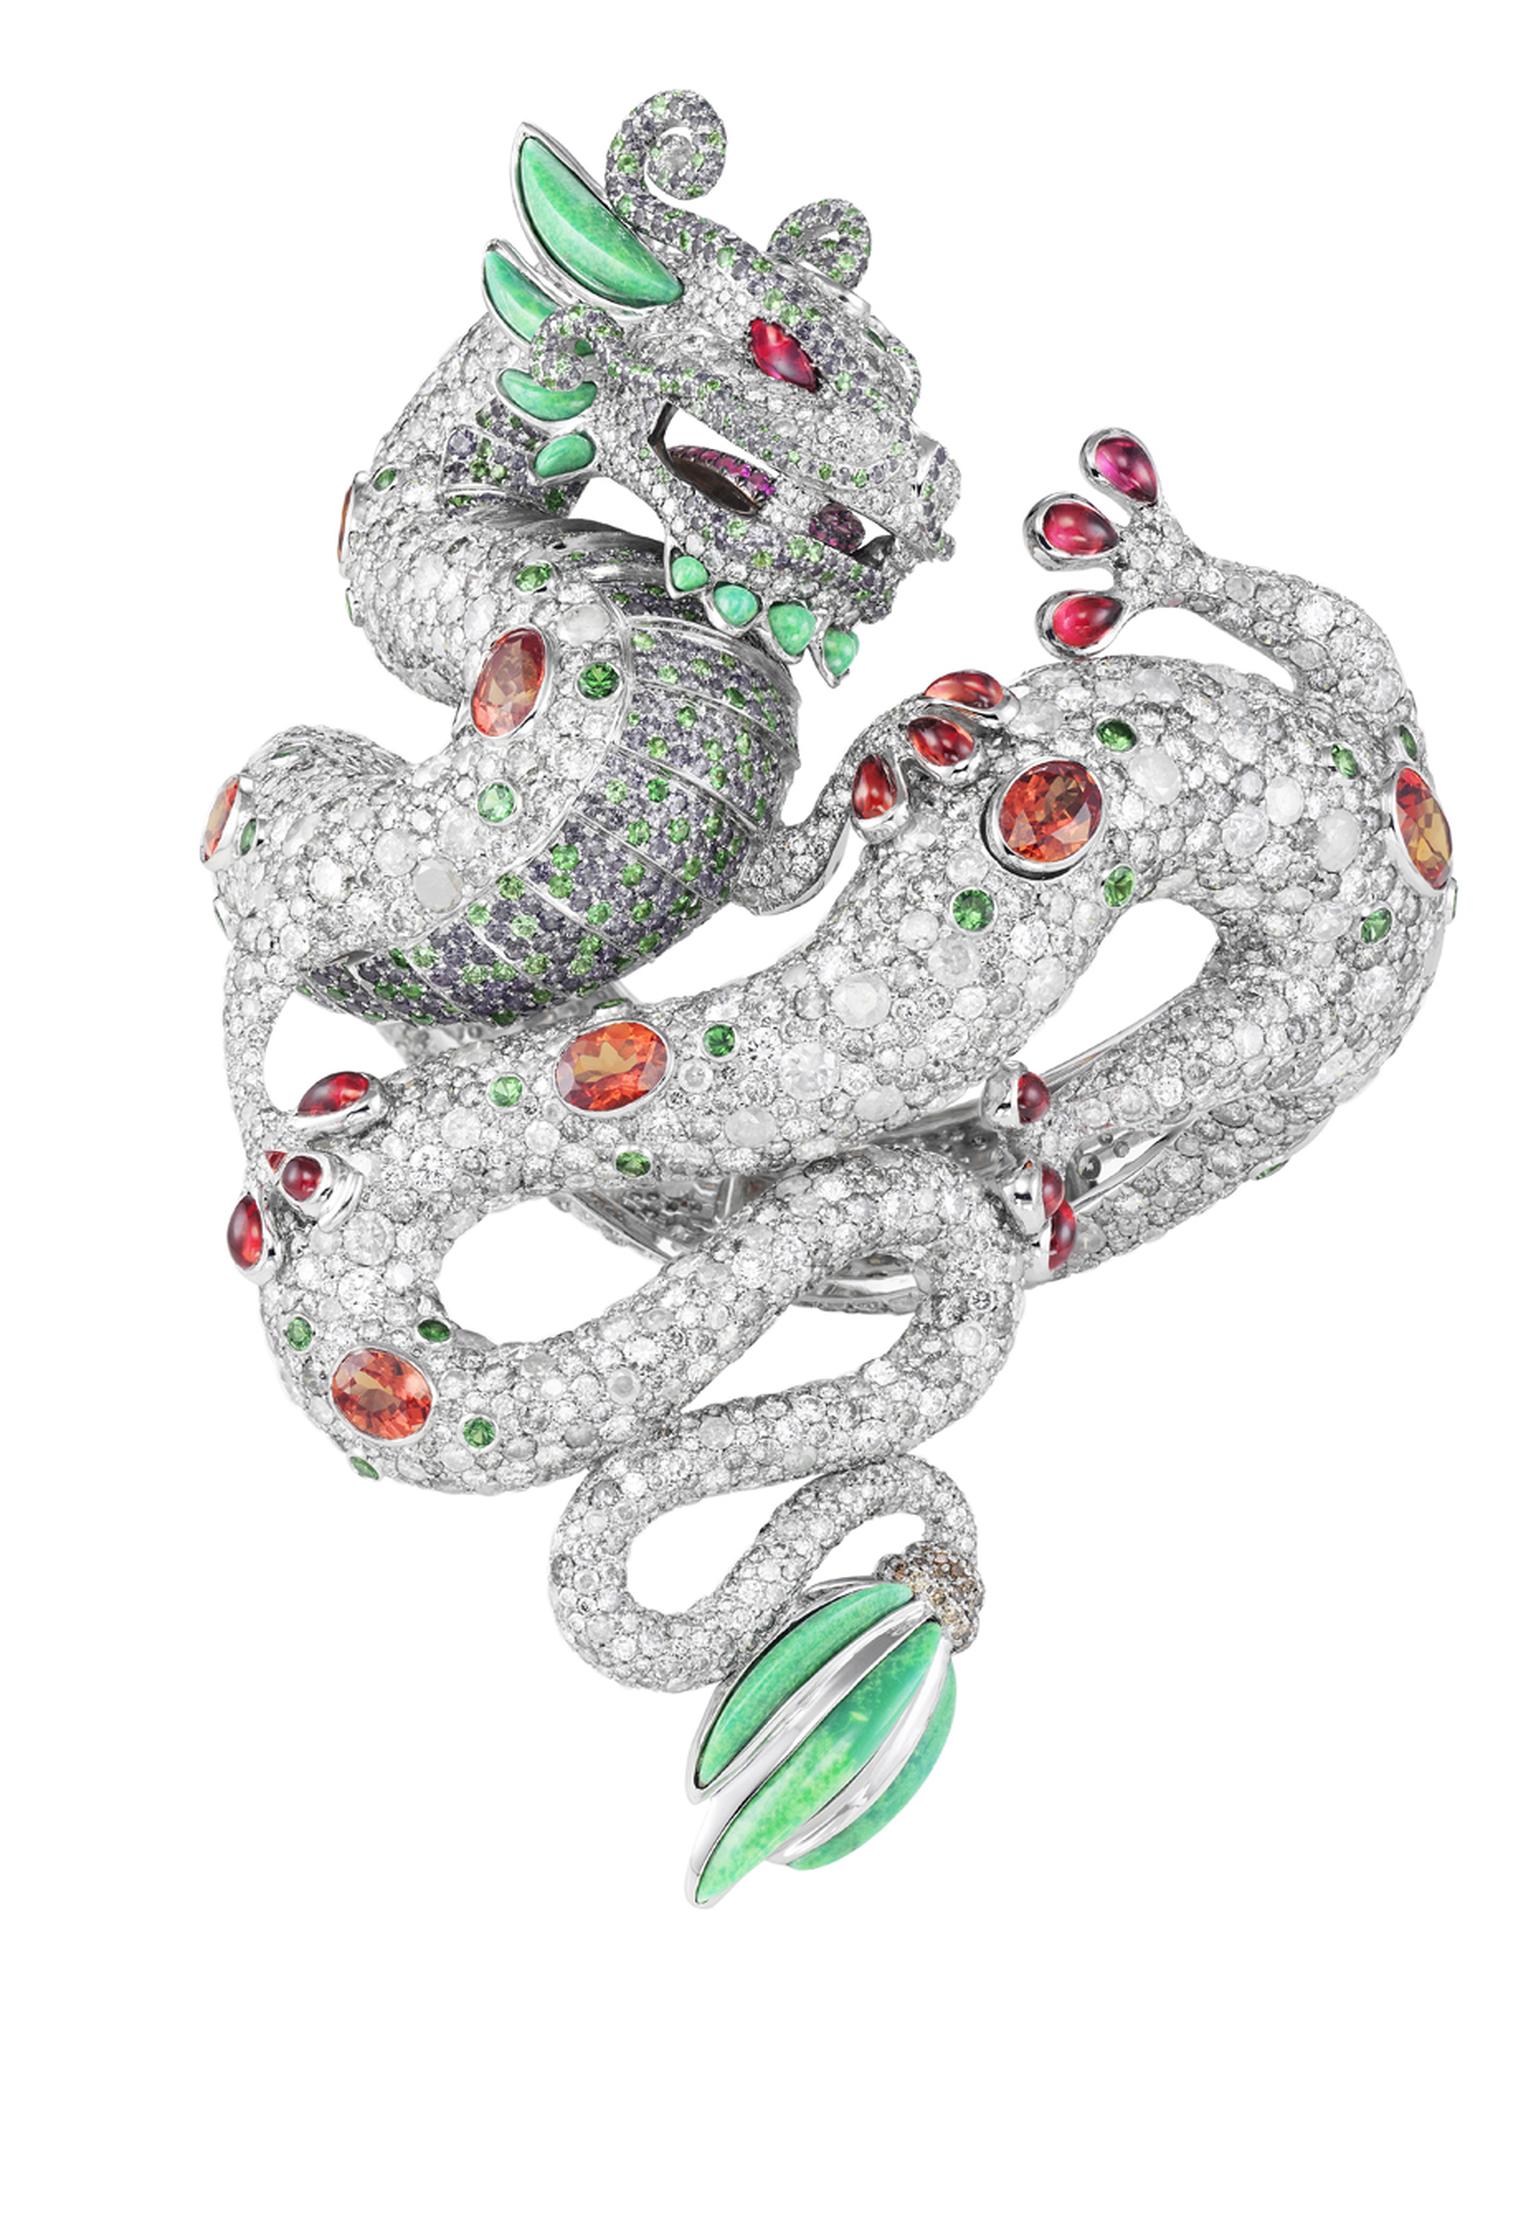 Harumi Klossowska for Chopard Dragon bracelet features rubies, diamonds, emerald and turquoise and fuses the major cultural symbols of the Chinese dragon with the Aztec plumed serpent.